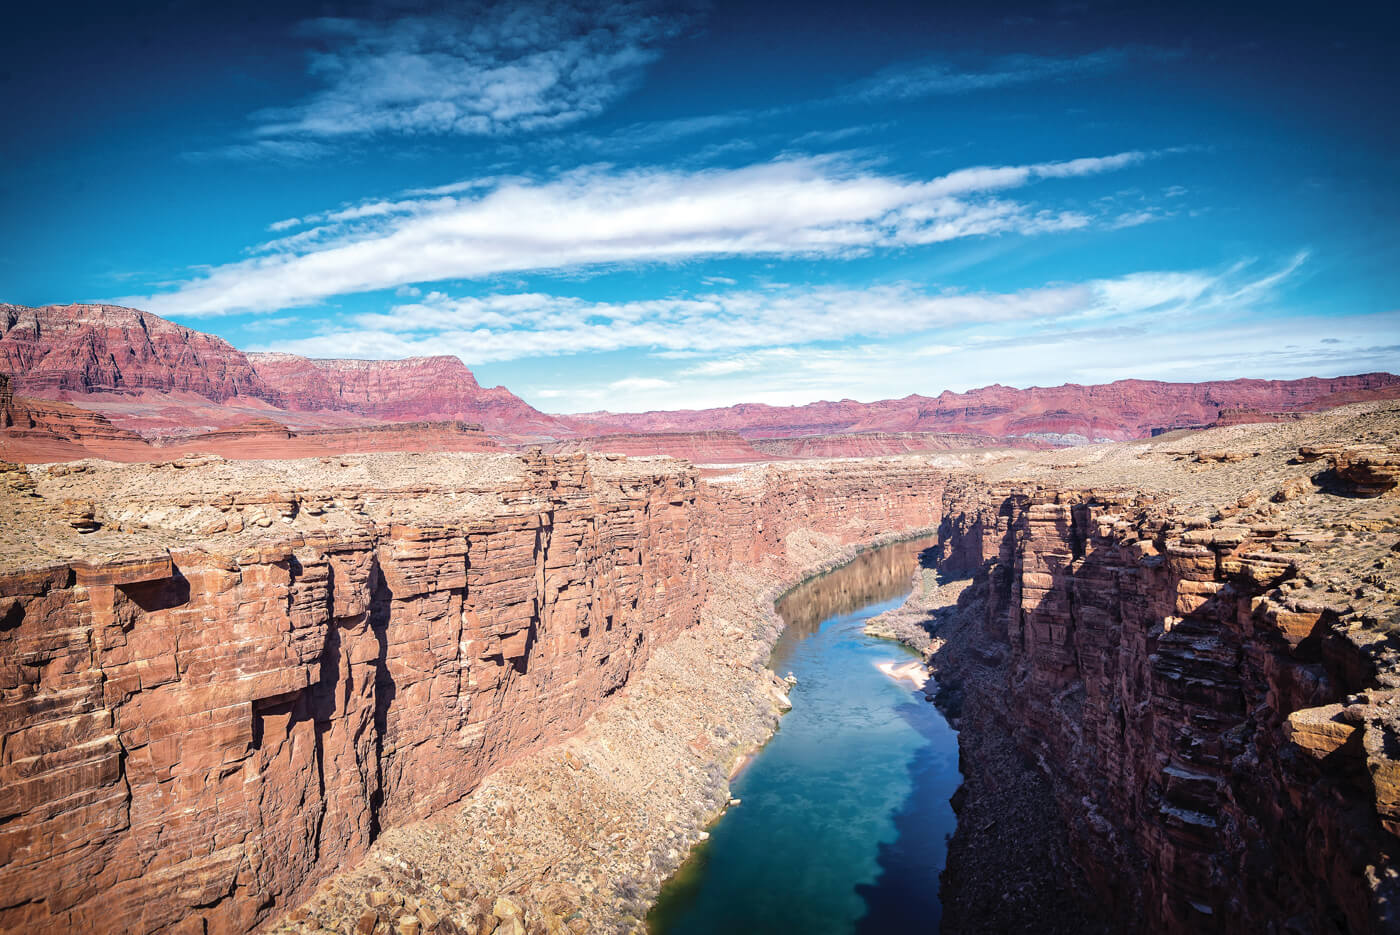 A view into the Grand Canyon of the Colorado River, from the Navajo Bridge— about as close as you can get to the canyon by vehicle.